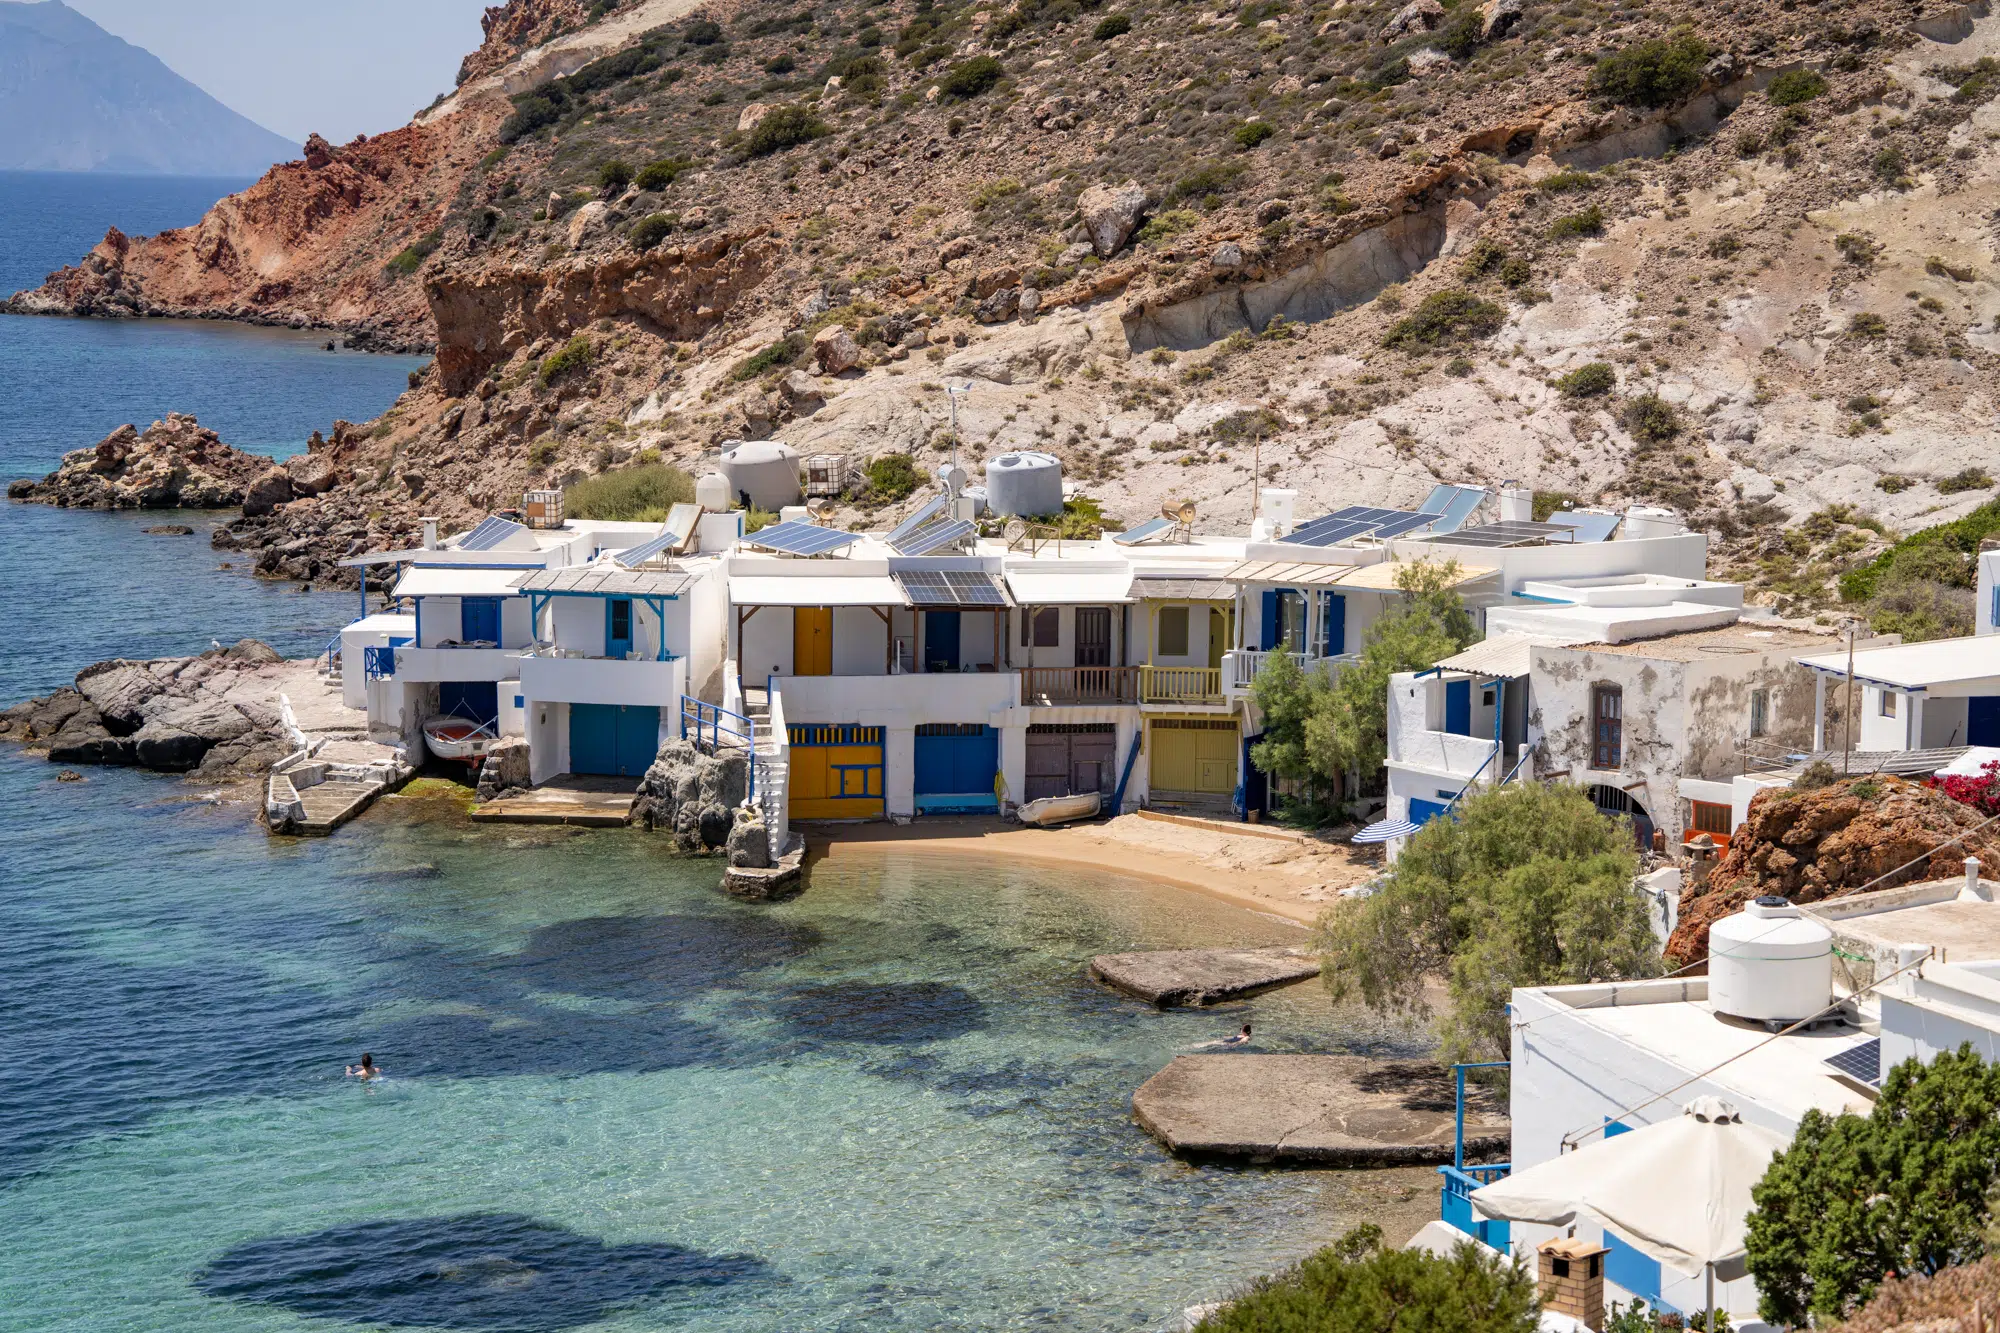 Island hopping in the cyclades